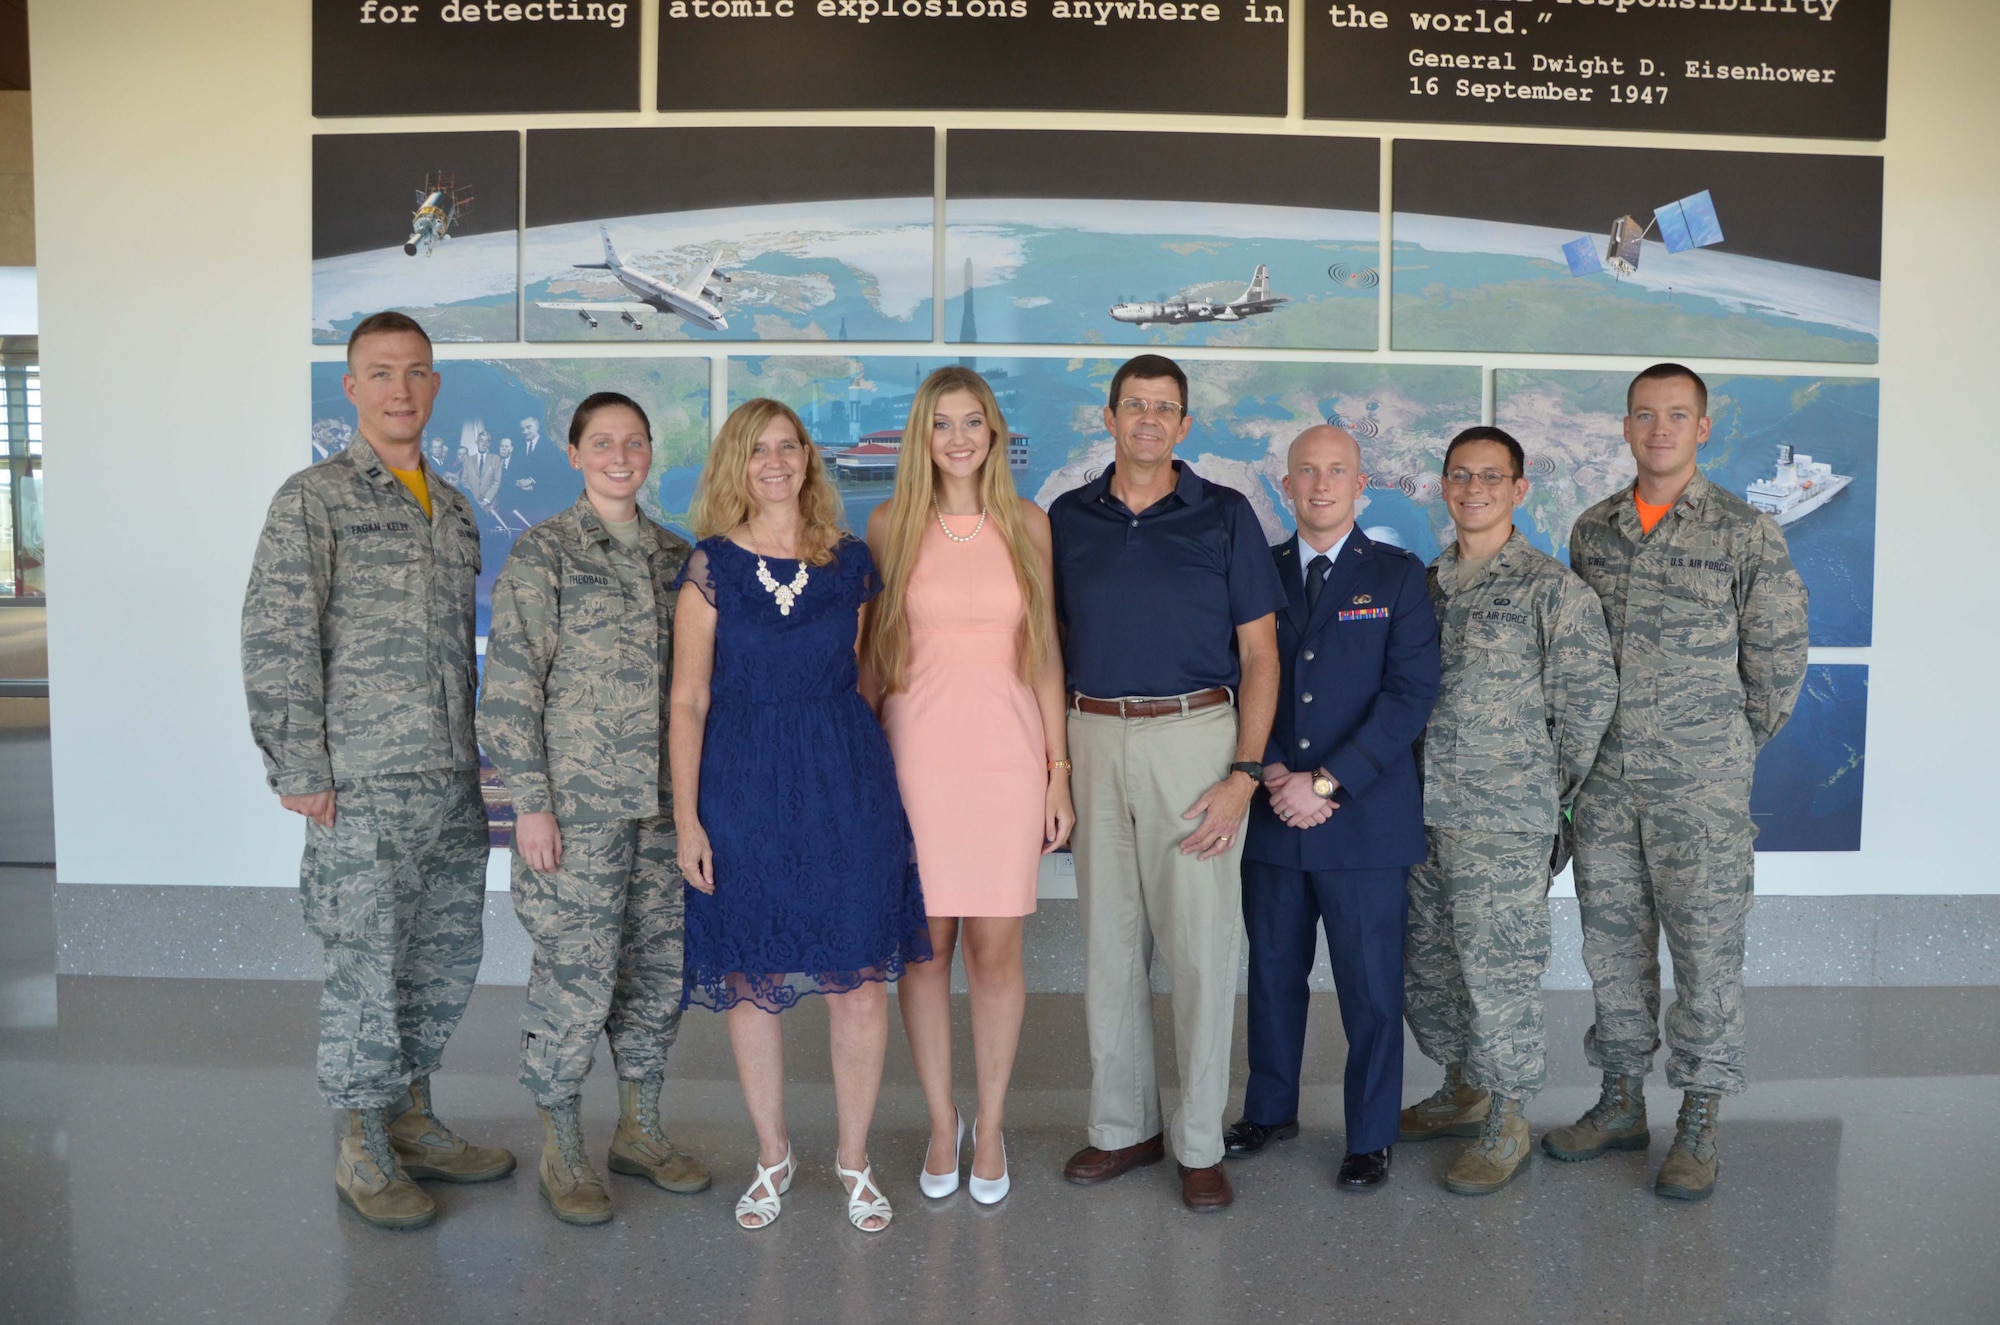 Madison Zook (center), poses with her parents Rhonda and Lee July 29, 2016 after members of the Air Force Technical Applications Center’s Company Grade Officers Council presented the teen with the council’s annual $500 cholarship award in AFTAC’s headquarters located at Patrick AFB, Fla.  From left to right: Capt. Stefan Fagan-Kelly, 2nd Lt. Emily Theobald, Rhonda Zook, Madison Zook, Lee Zook, 1st Lt. Michael Duff, 1st Lt. Joshua Hall and 2nd Lt. James Stofel. (U.S. Air Force photo by Susan A. Romano)